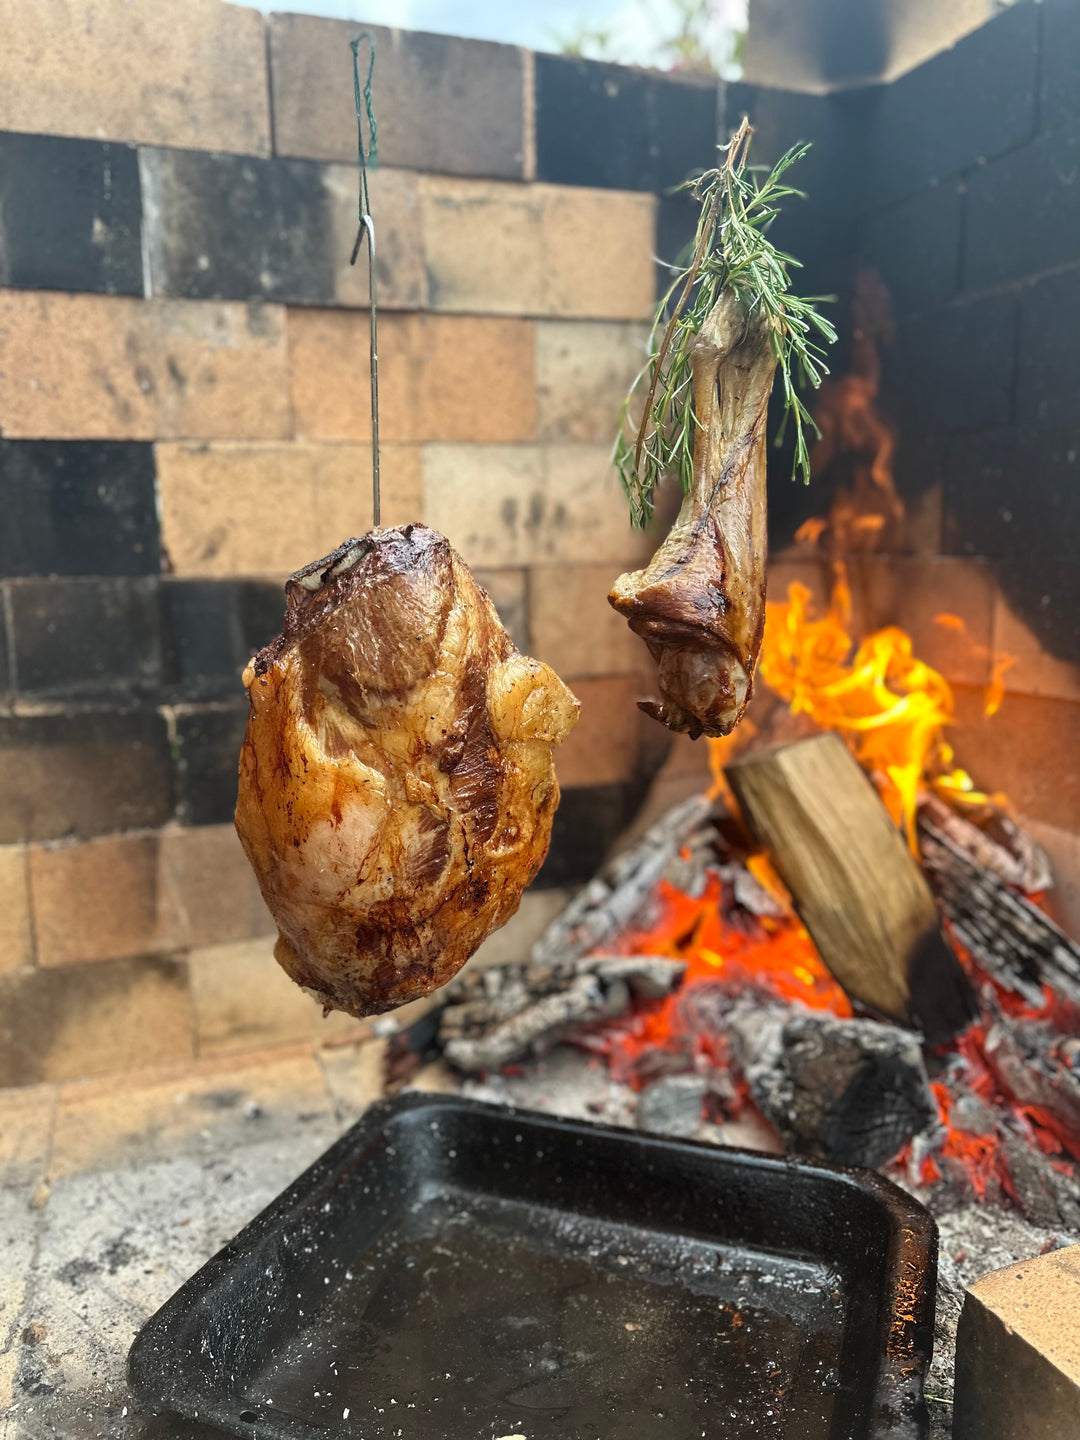 The Art of Hanging Food over Fire